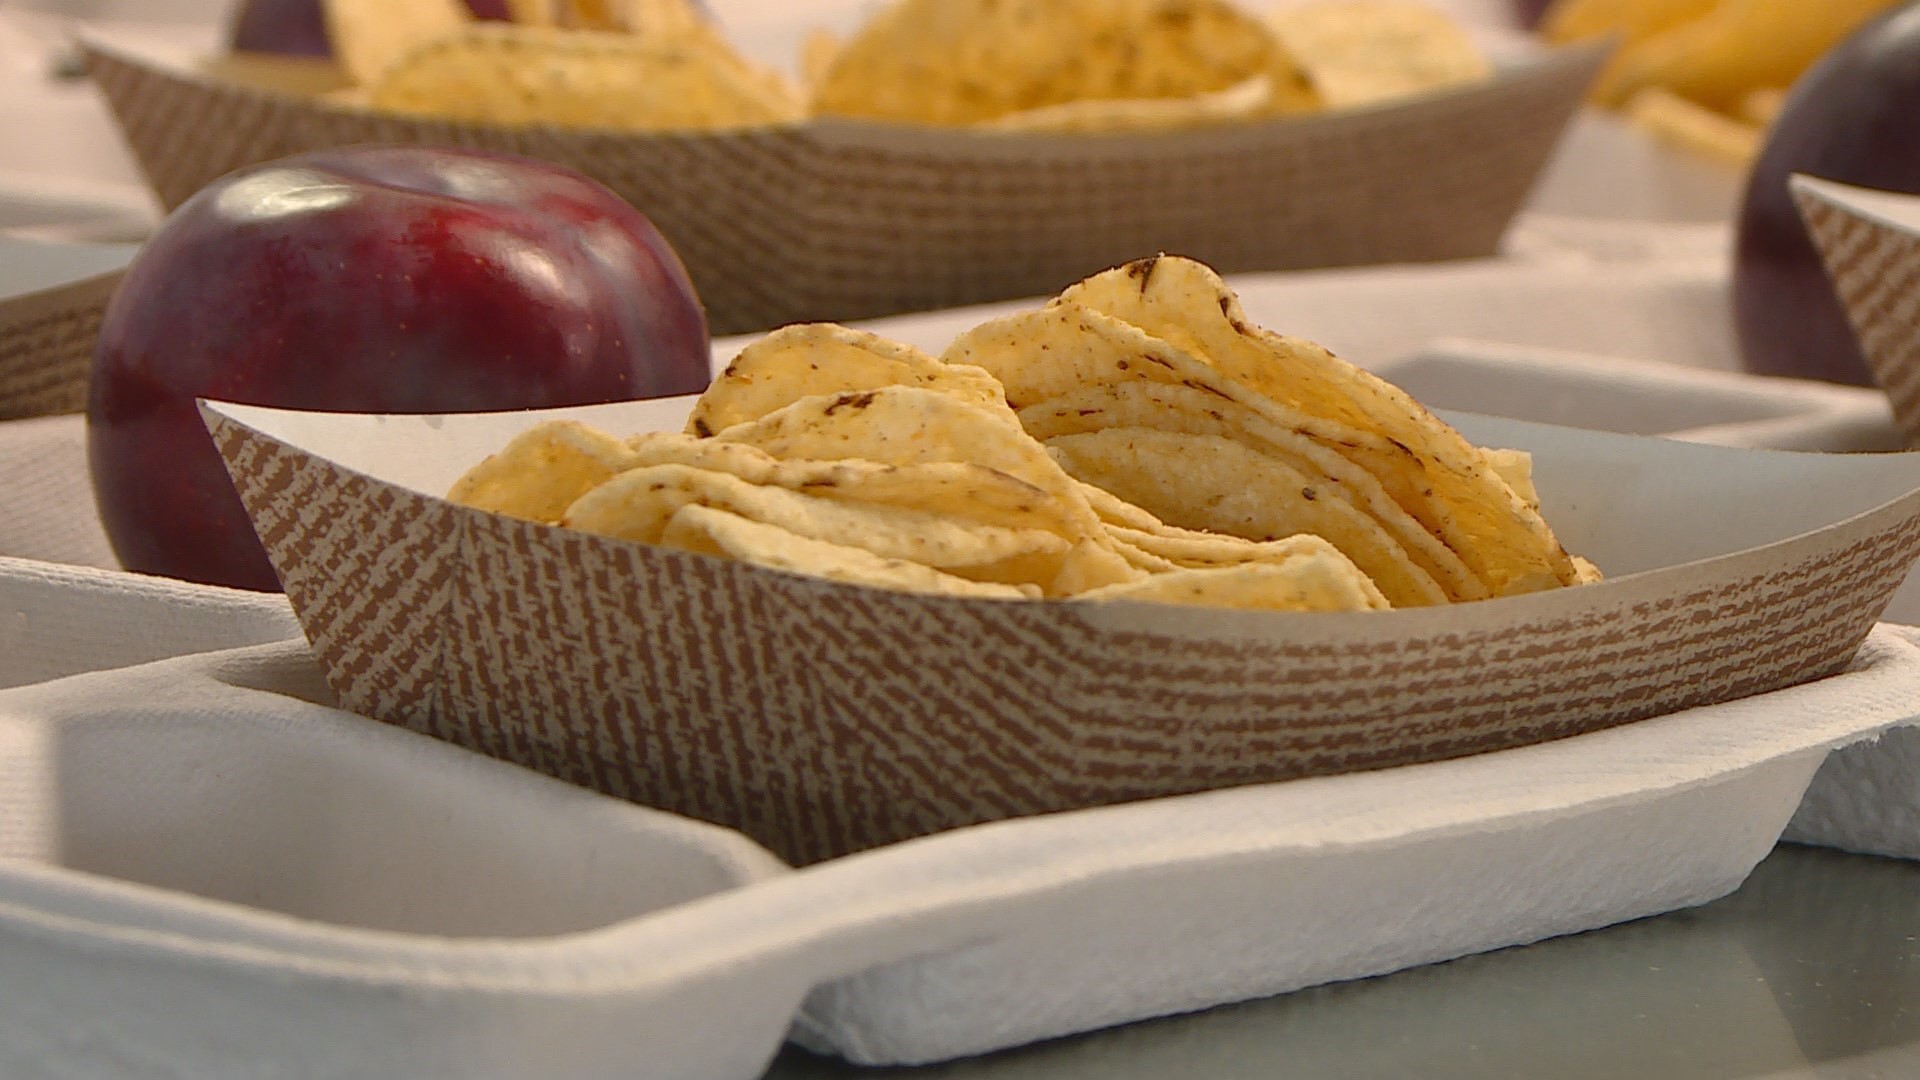 Leaders in the district say the amount of kids eating school lunches is up about 21 percent this school year.